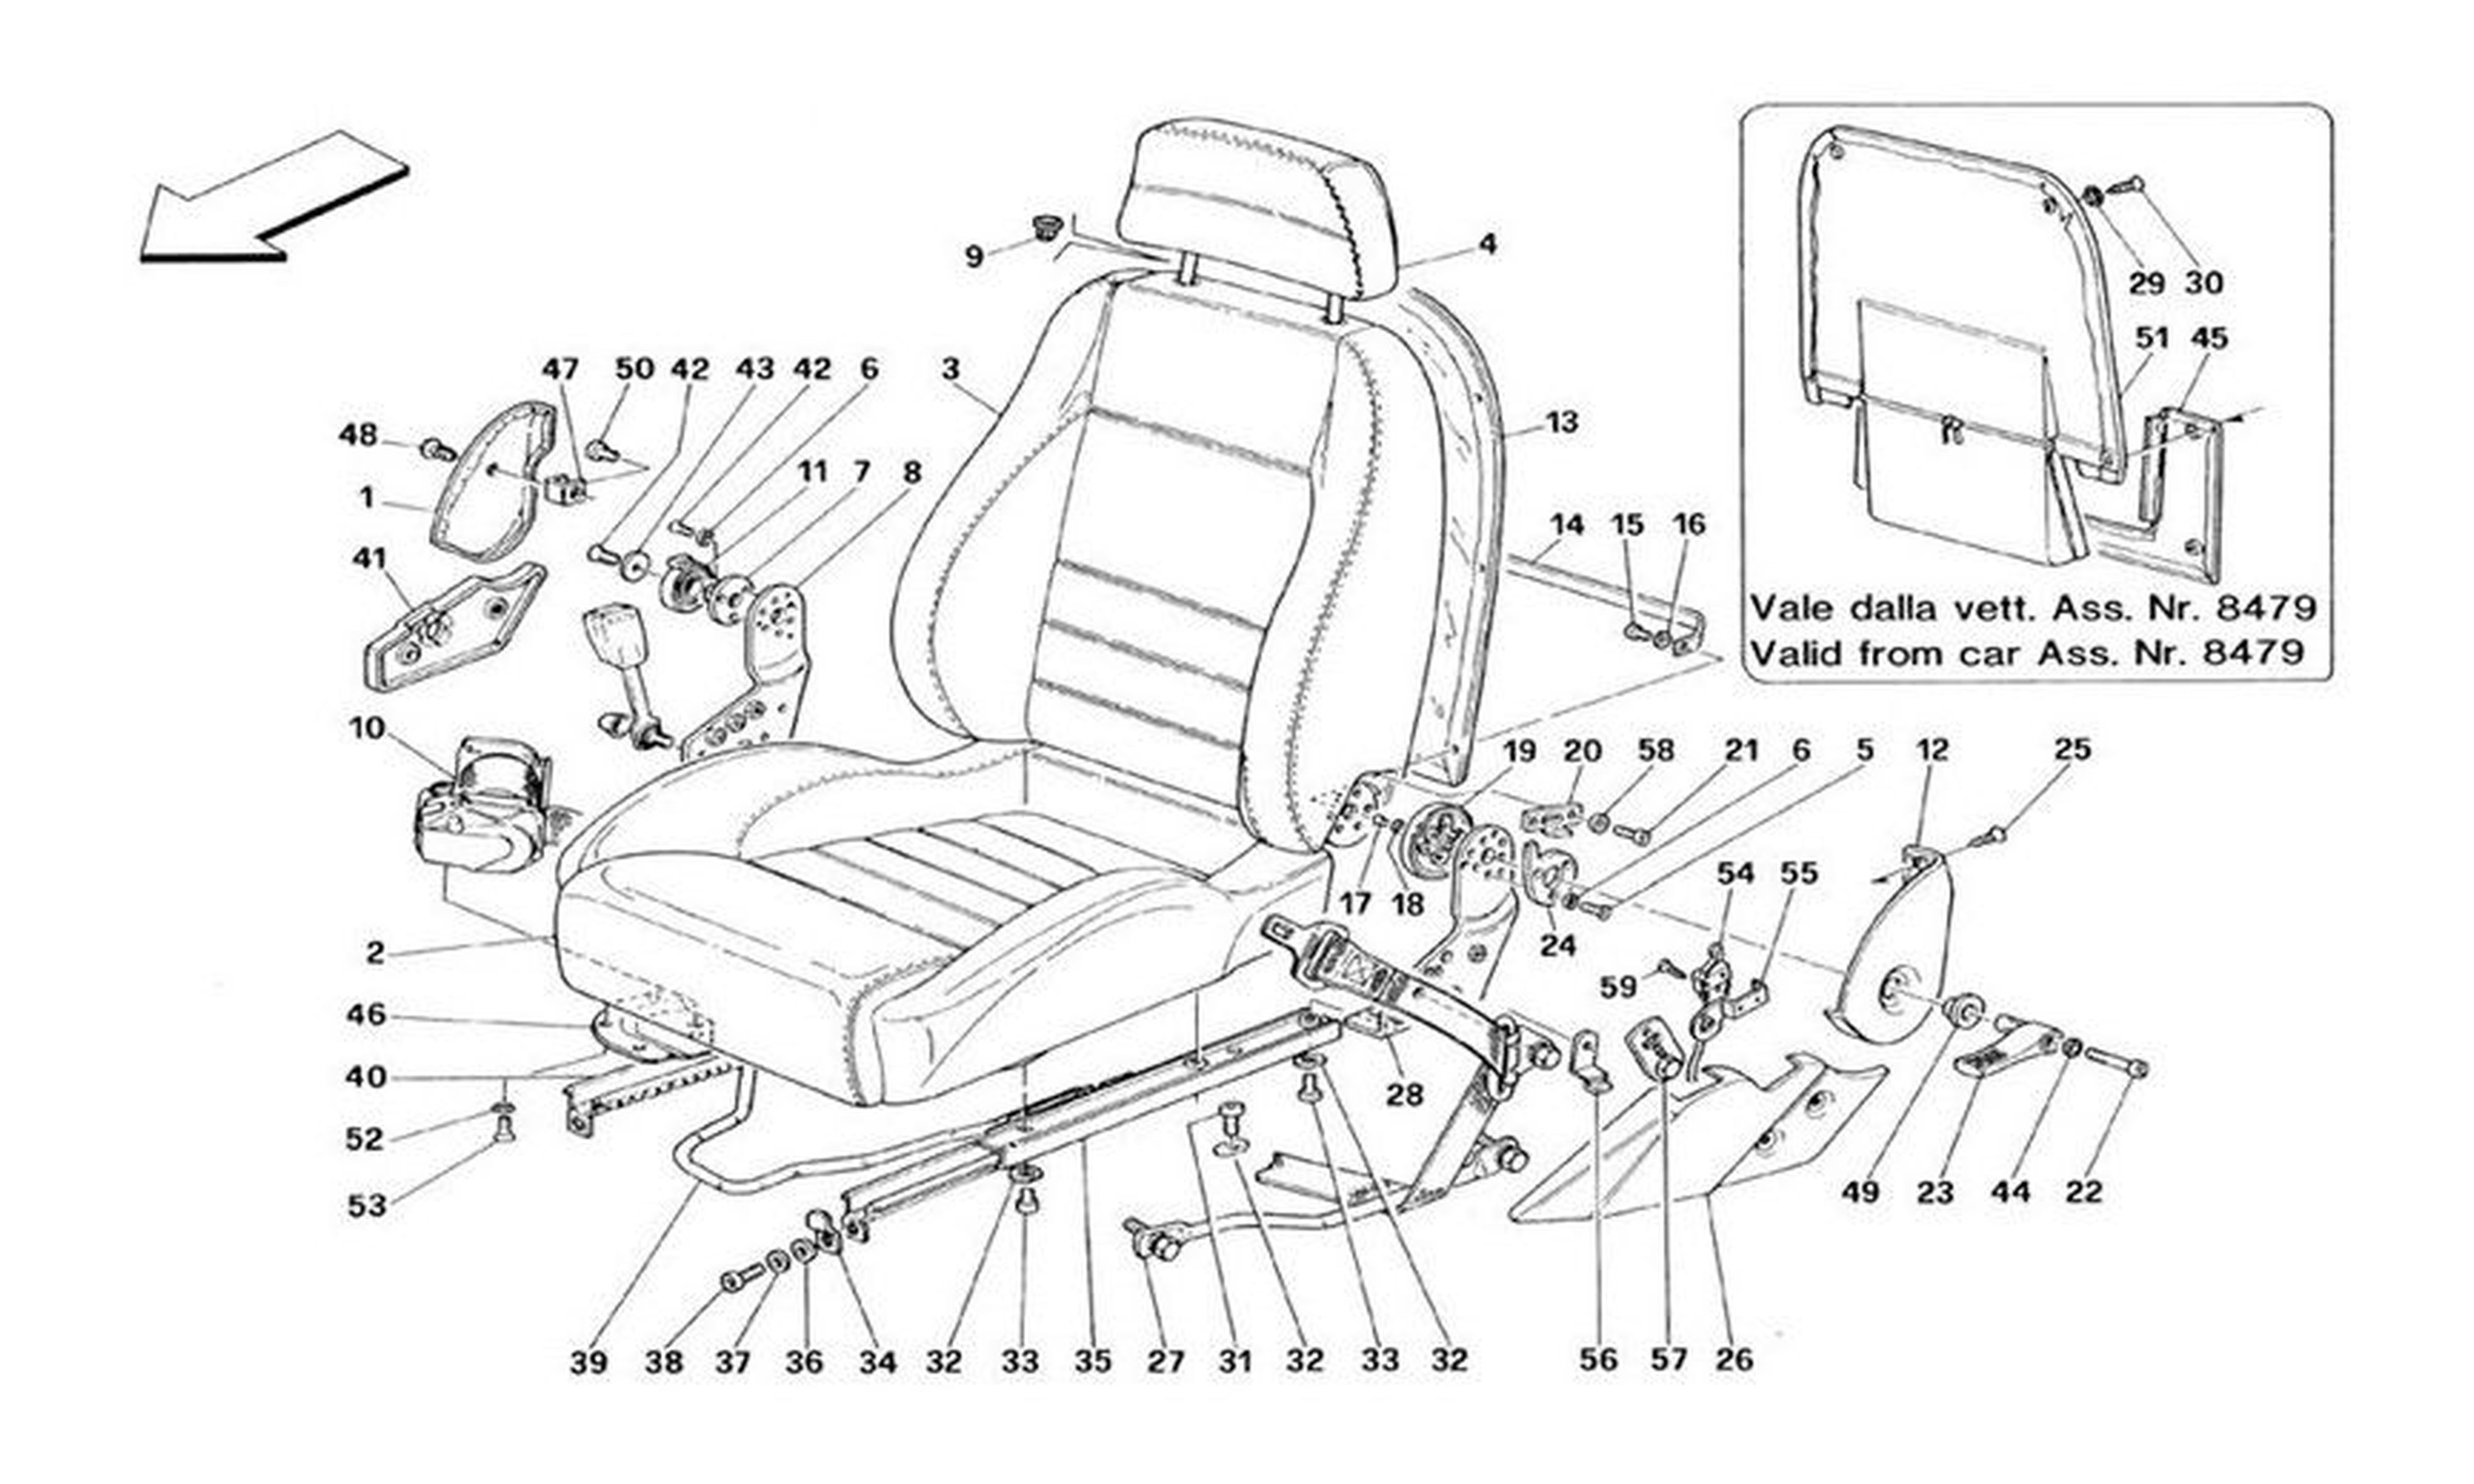 Schematic: Seats And Safety Belts -Valid For Cars With Passive Safety Belts - Valid From Car Ass. Nr. 5298